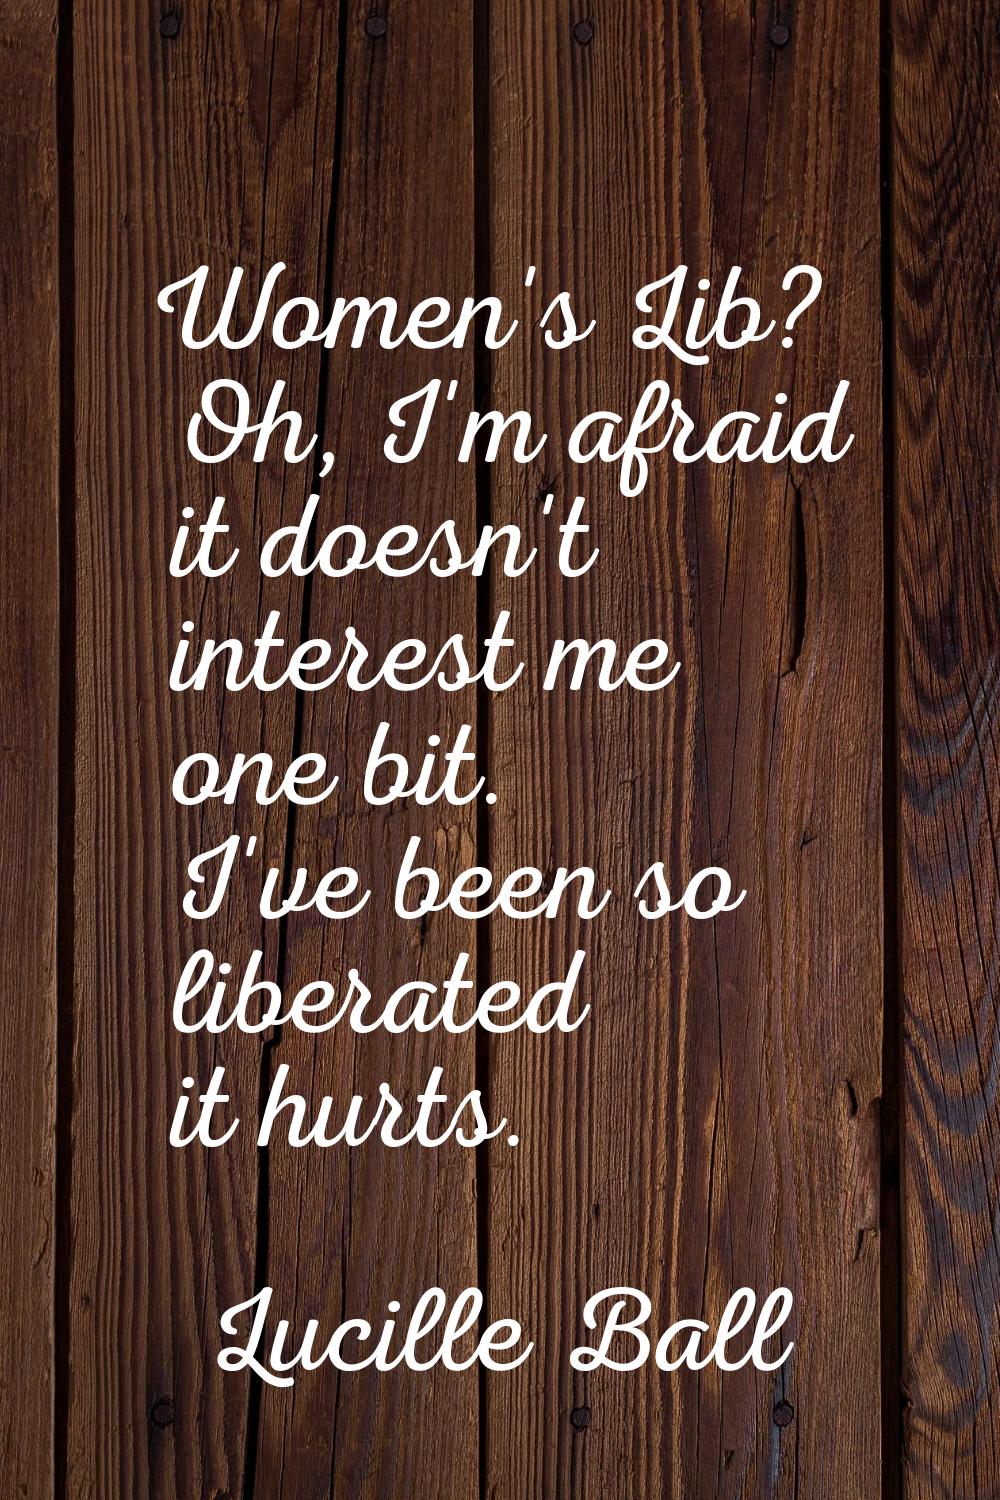 Women's Lib? Oh, I'm afraid it doesn't interest me one bit. I've been so liberated it hurts.